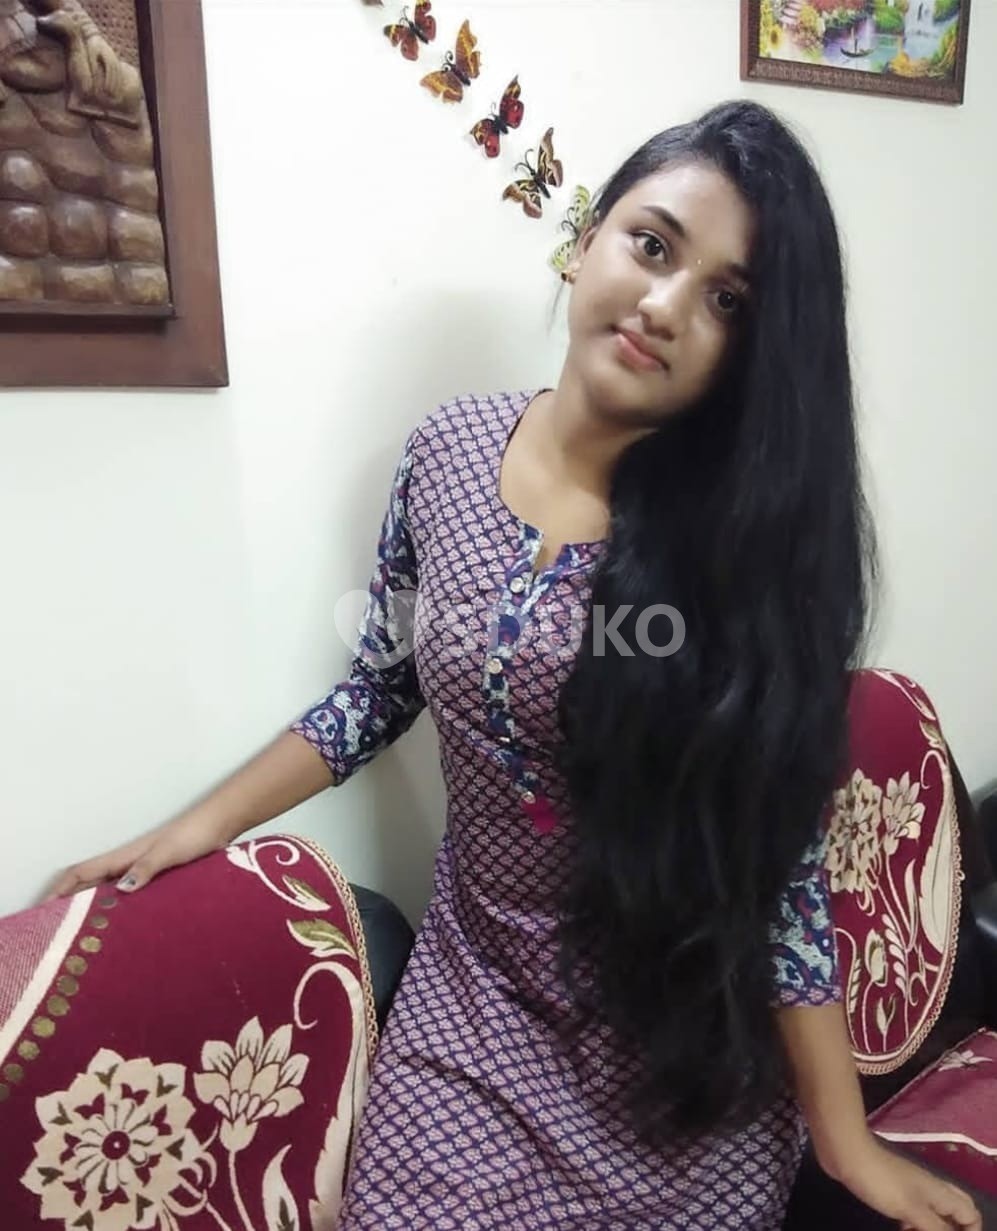 Hyderabad gys afortable price outcall incall available independent call me now